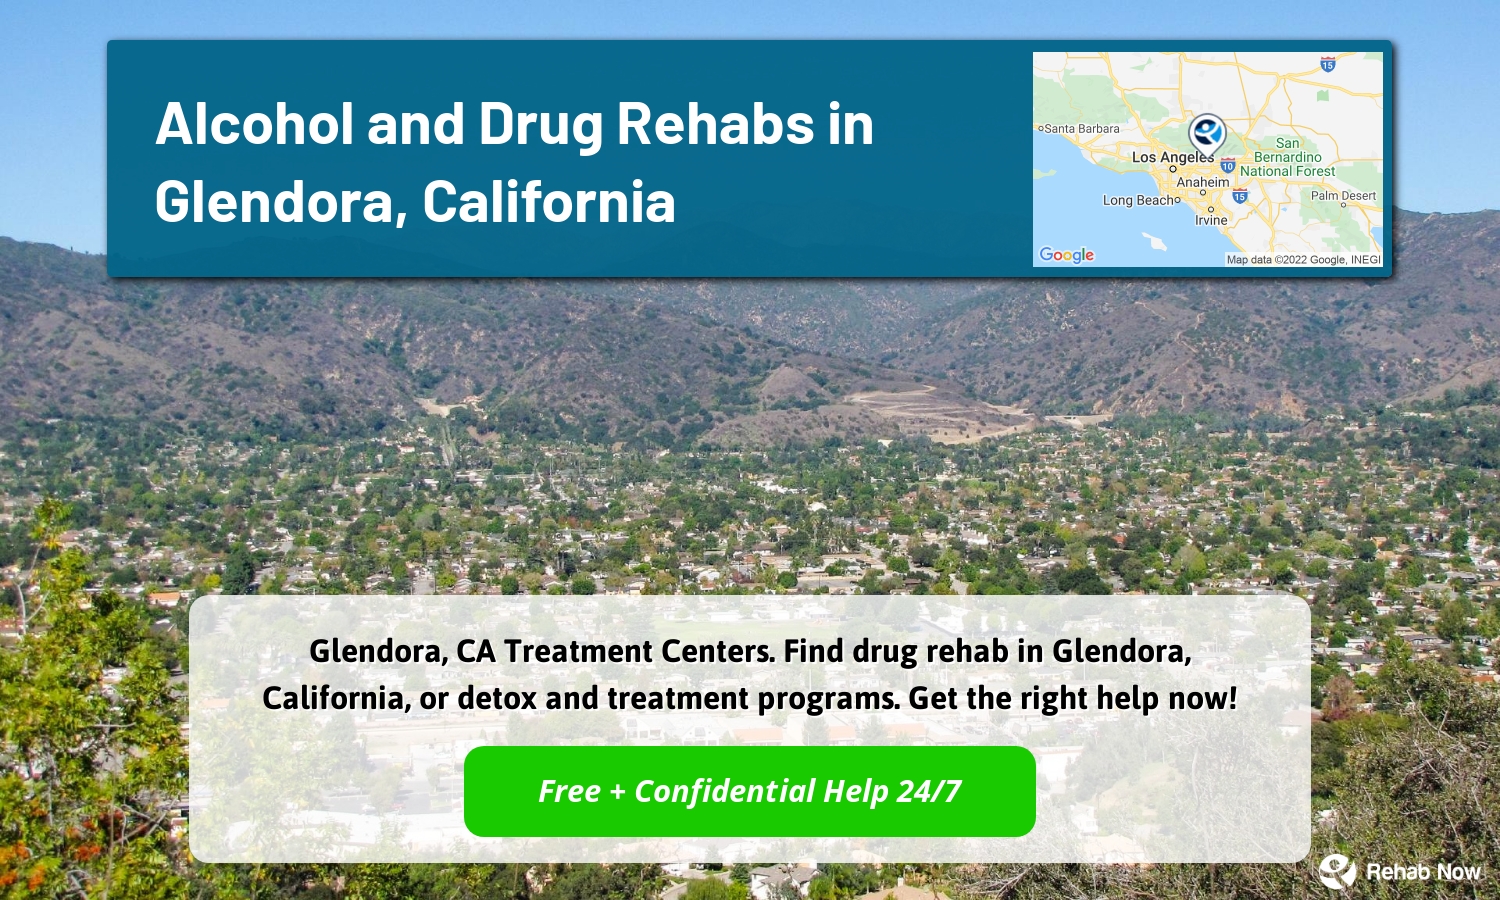 Glendora, CA Treatment Centers. Find drug rehab in Glendora, California, or detox and treatment programs. Get the right help now!